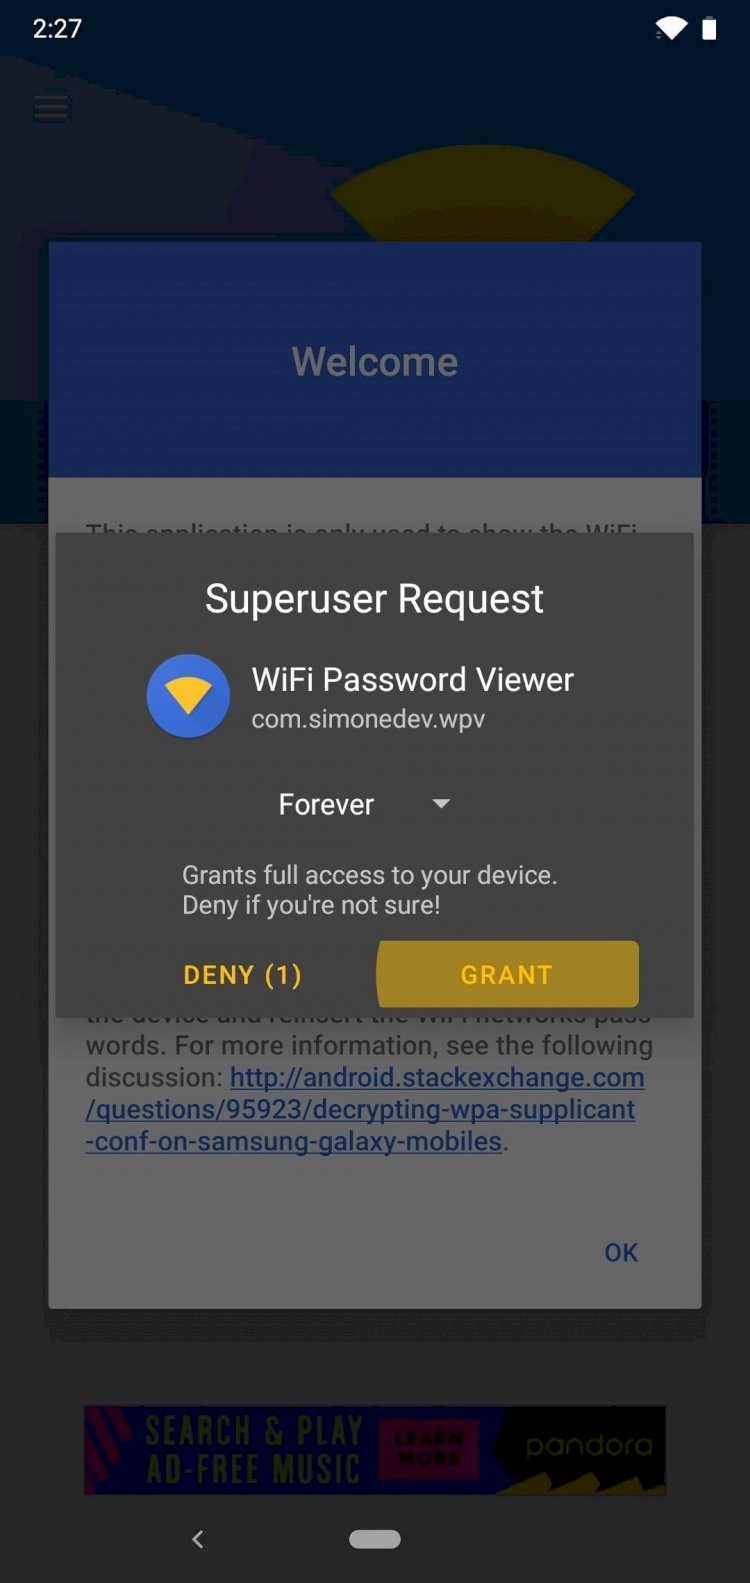 How To Access Passwords for Wi-Fi Networks You've Connected Your Android Device.